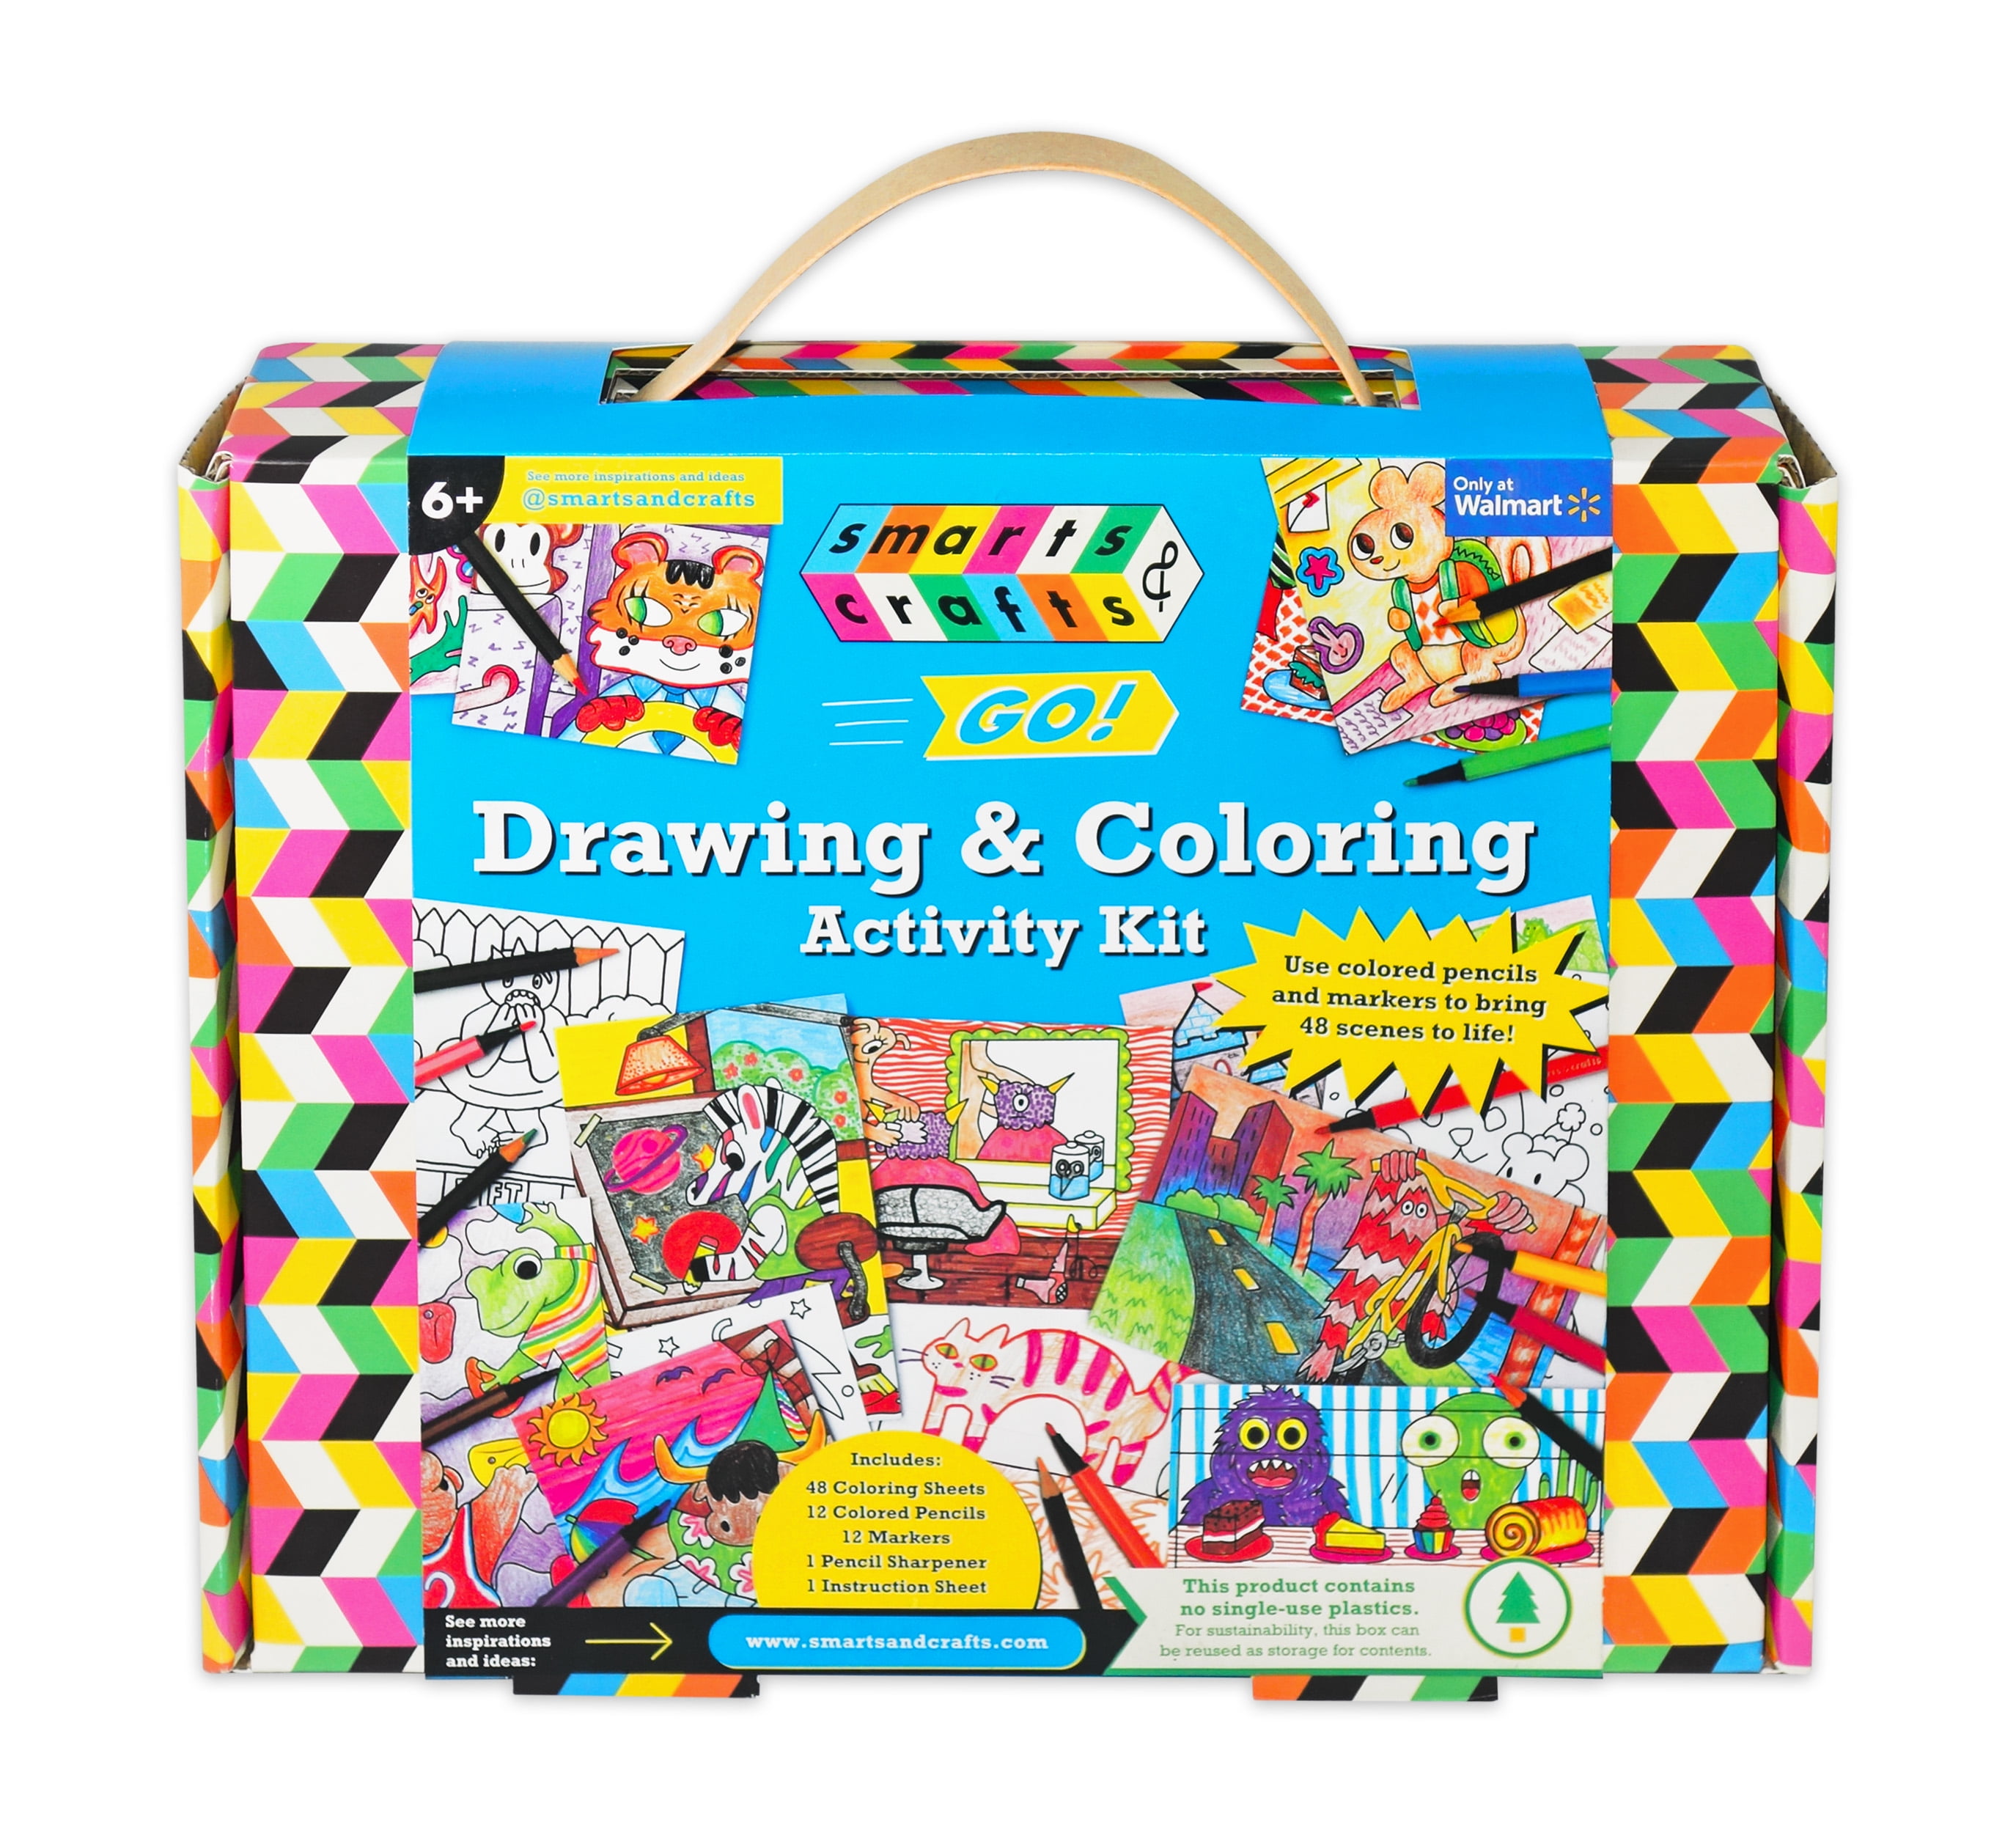 Smarts & Crafts Go: Coloring and Drawing Kit, 74 Pieces, for Boys